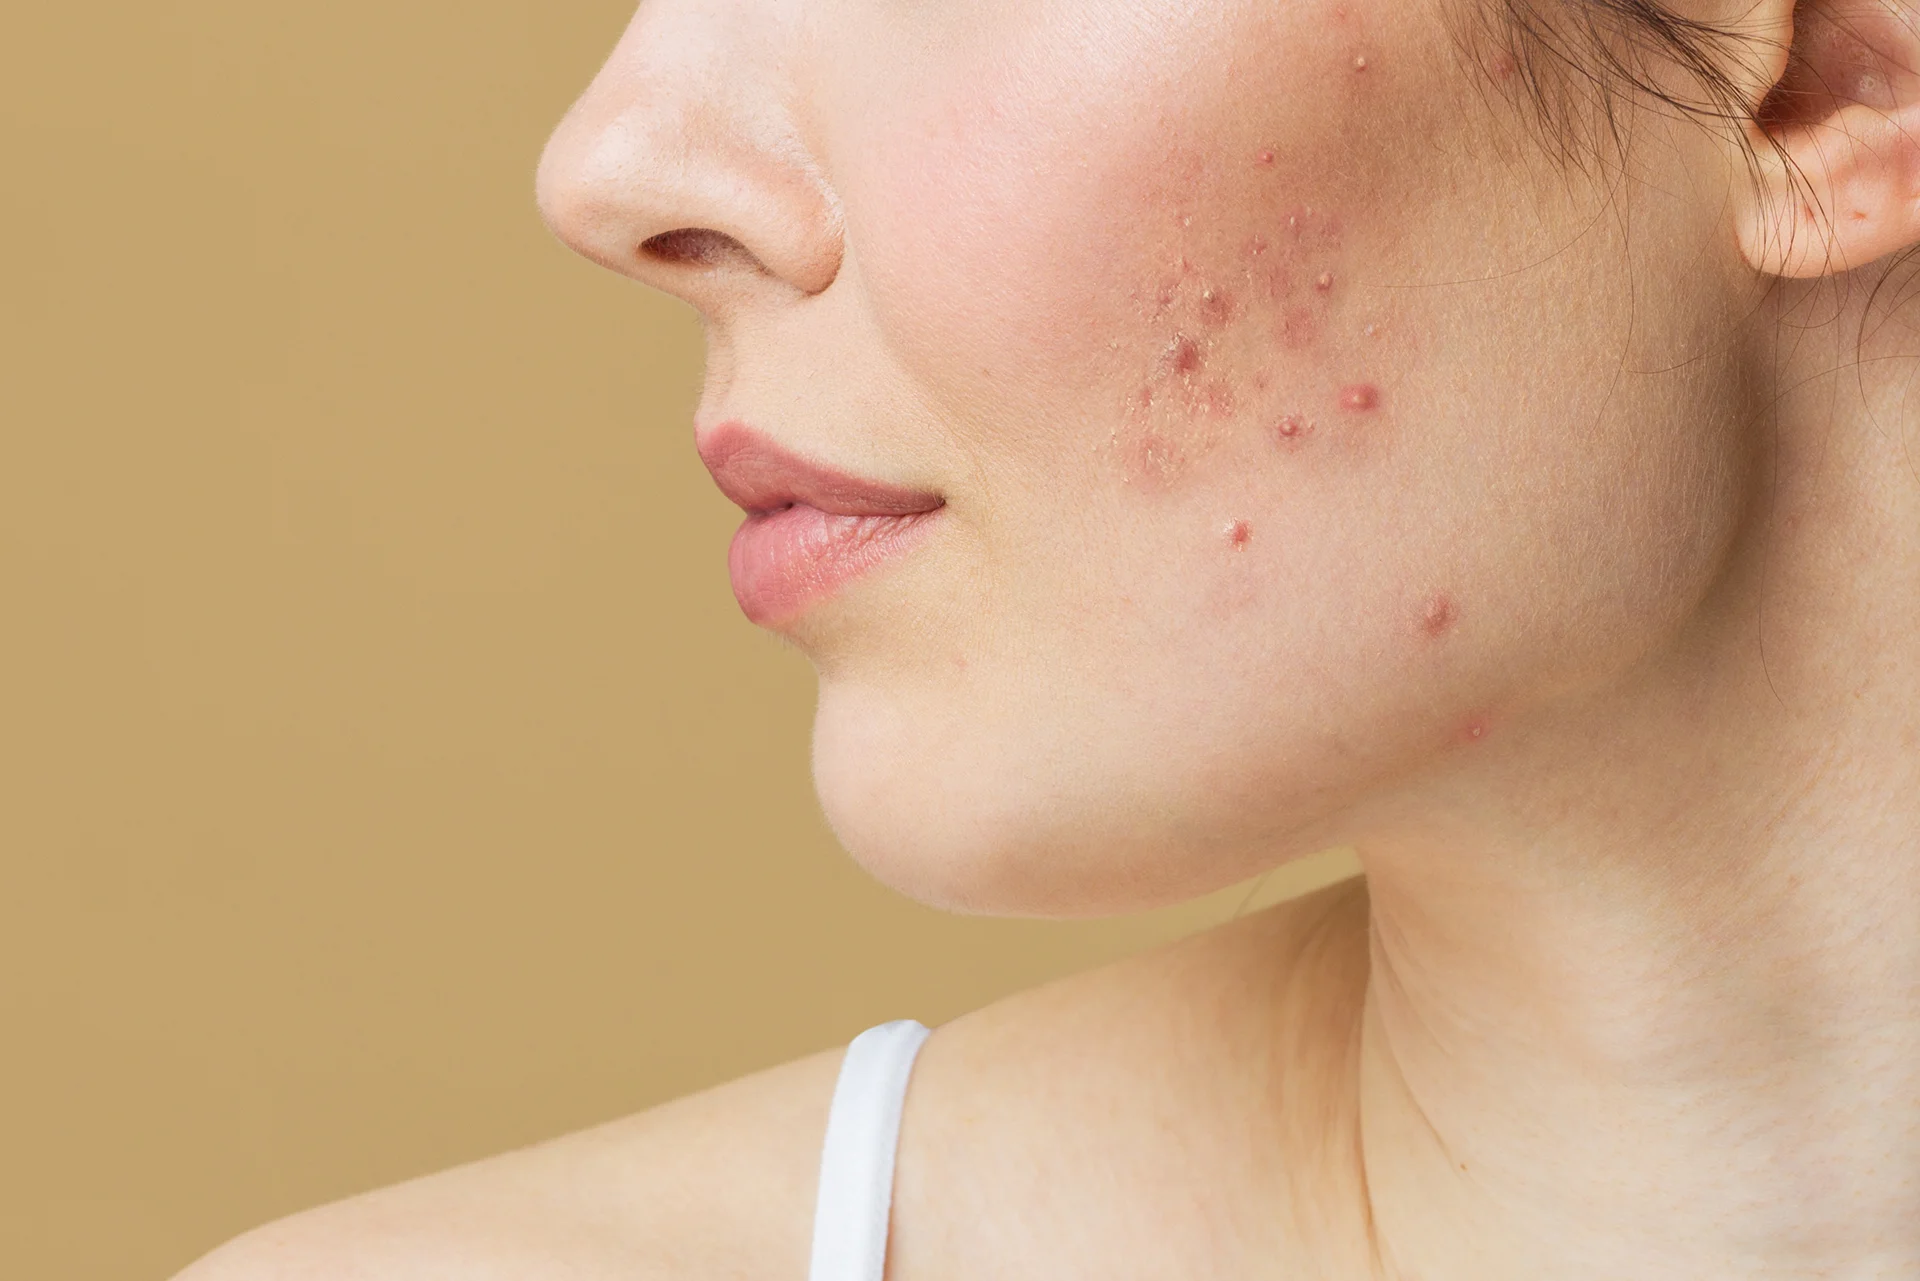 acne scars on the woman's face